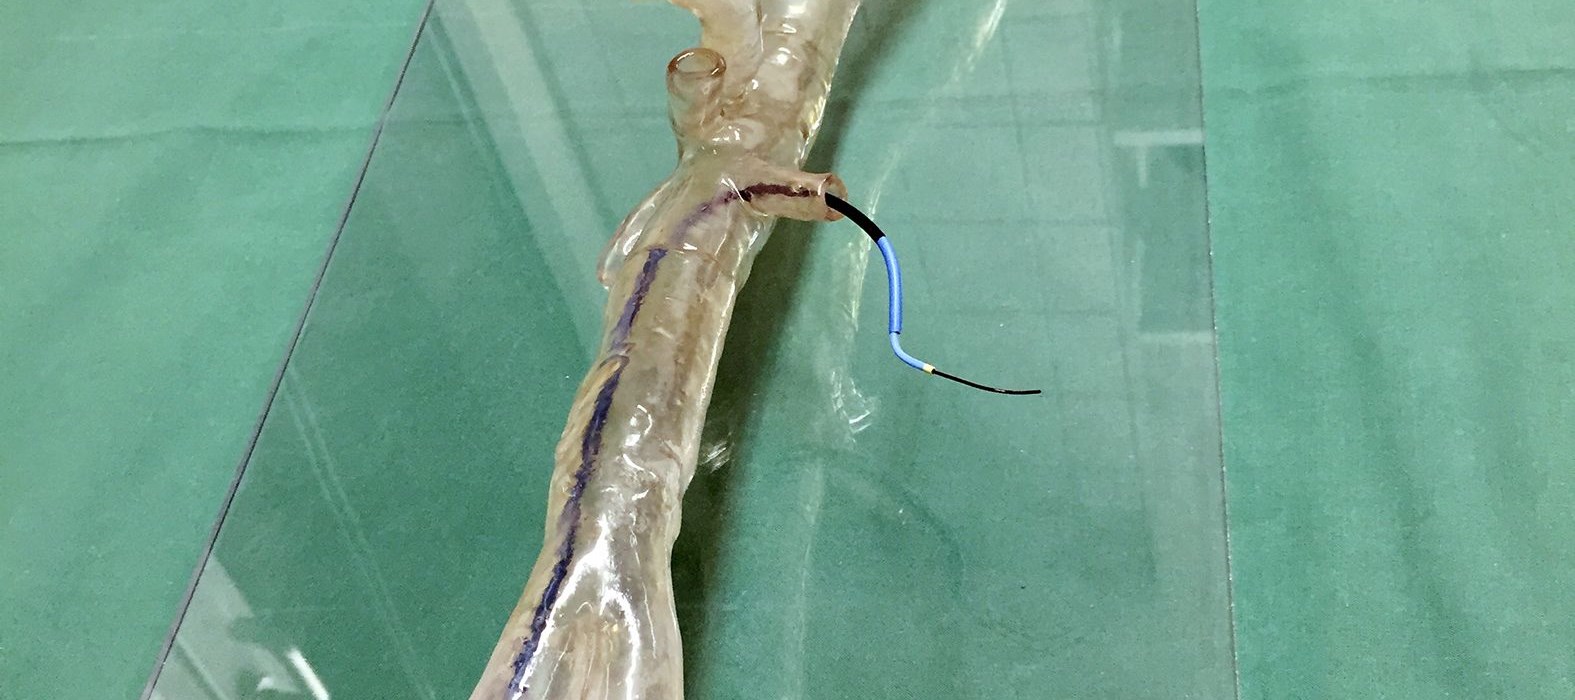 Transparent 3D printed model of a patient-specific aortic arch used by the University Hospital Mainz to practice complex endovascular surgeries.